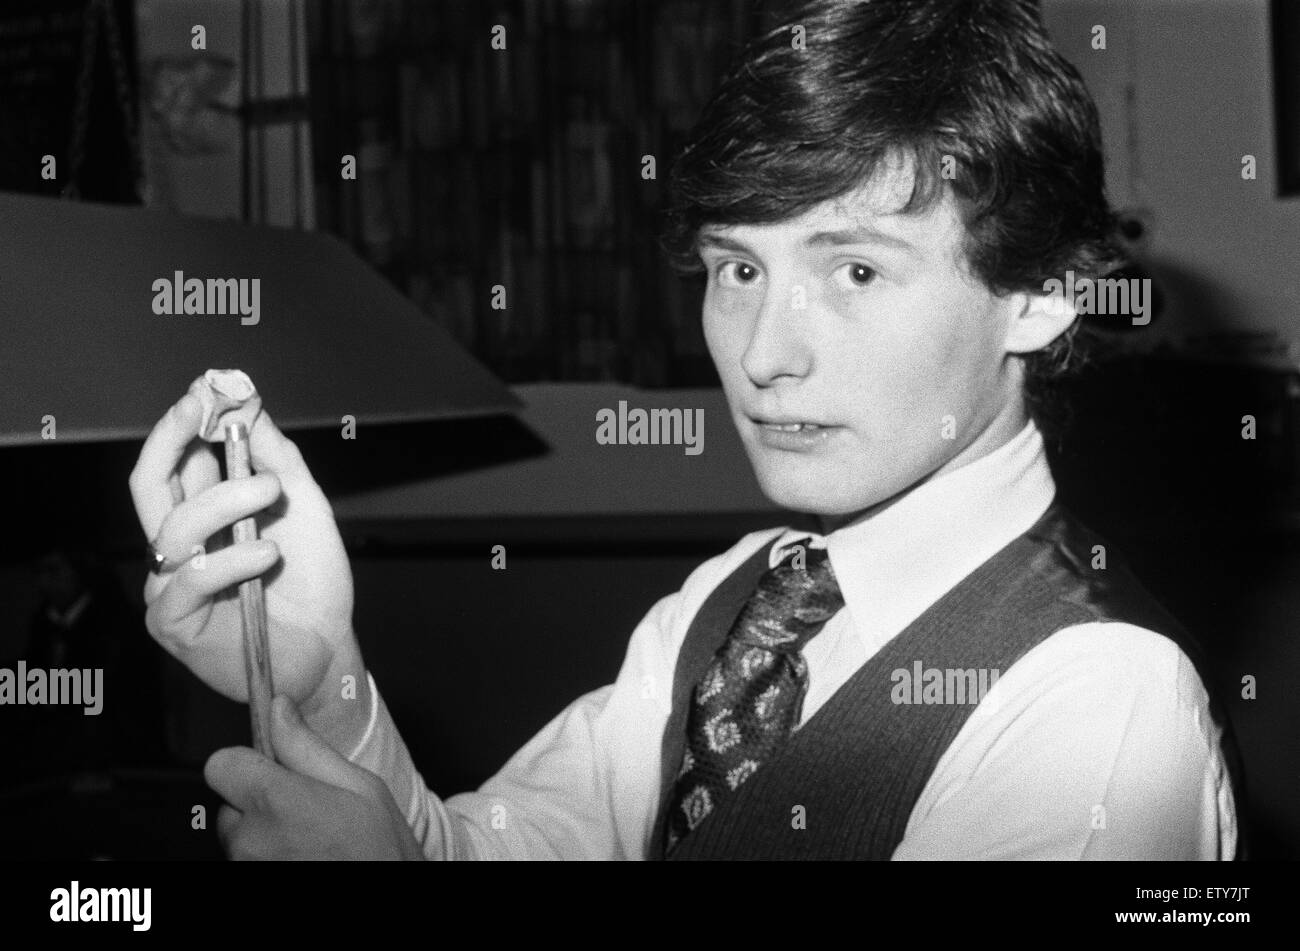 Seventeen year old snooker player <b>Jimmy White</b> playing at Wisbech ... - seventeen-year-old-snooker-player-jimmy-white-playing-at-wisbech-conservative-ETY7JT